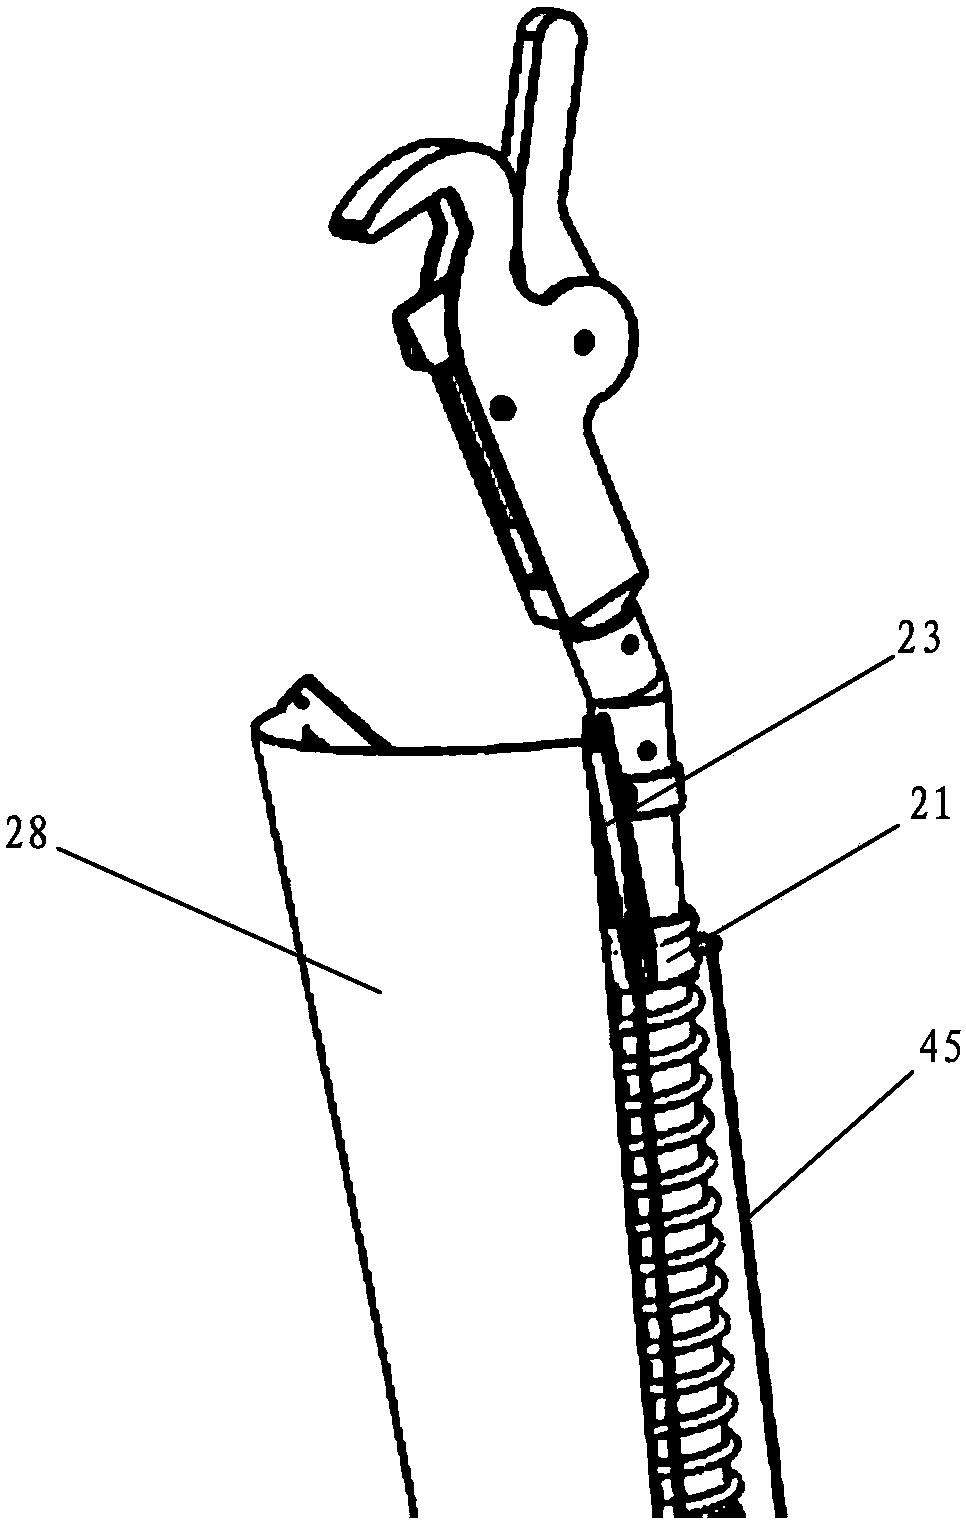 Handheld fruit picker provided with long telescopic rod